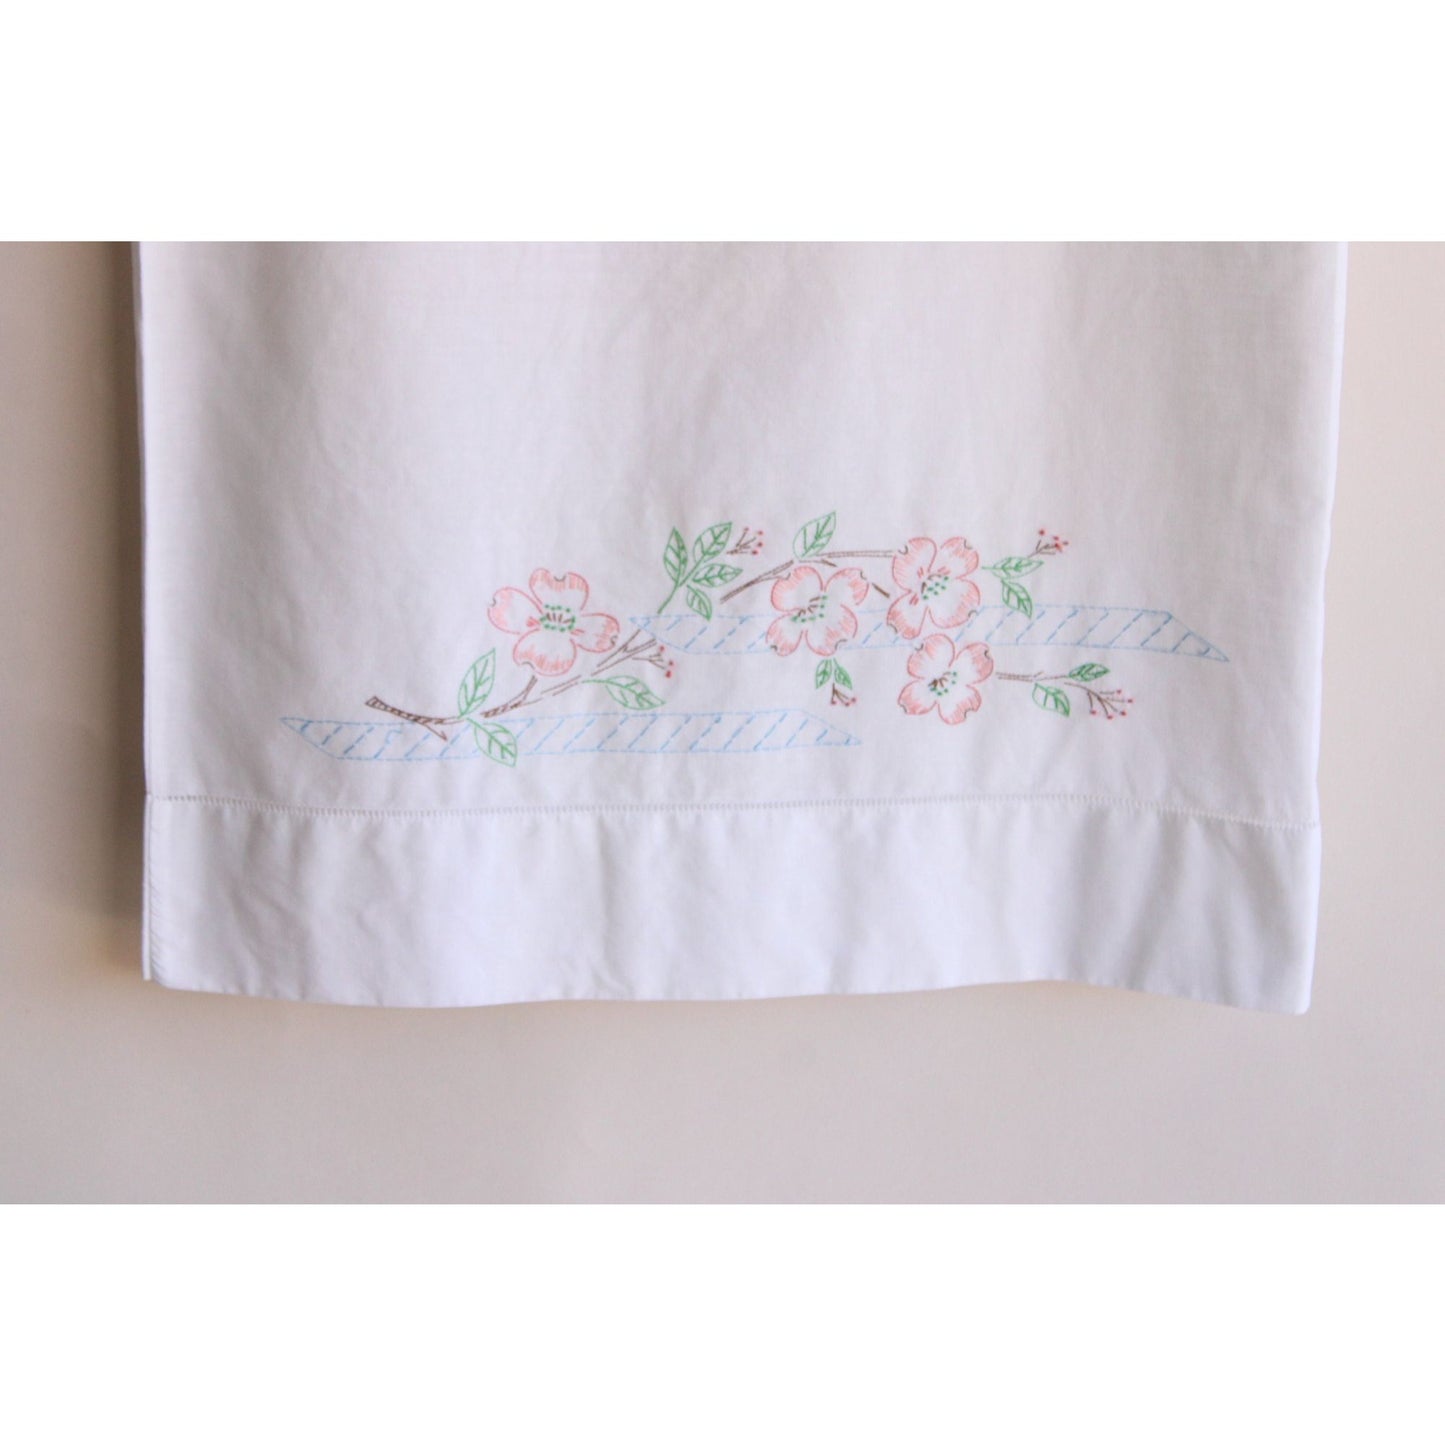 Vintage 1970s 1980s Pillow Case With Embroidered Flowers